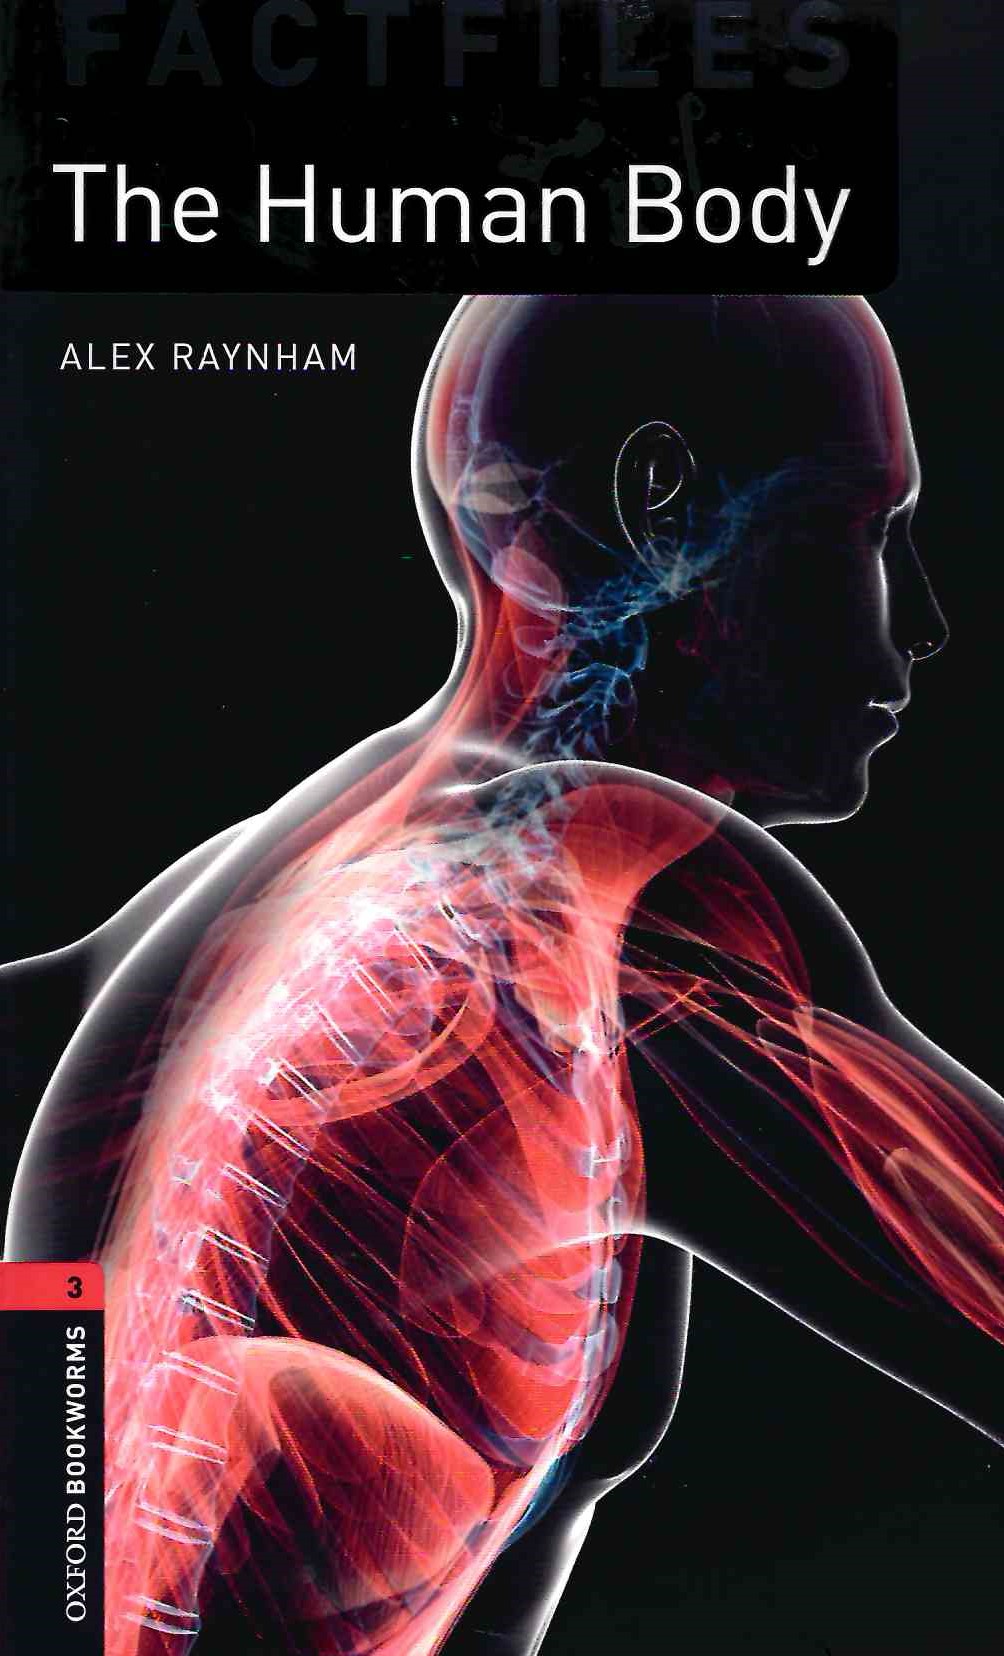 Oxford Bookworms: The Human Body